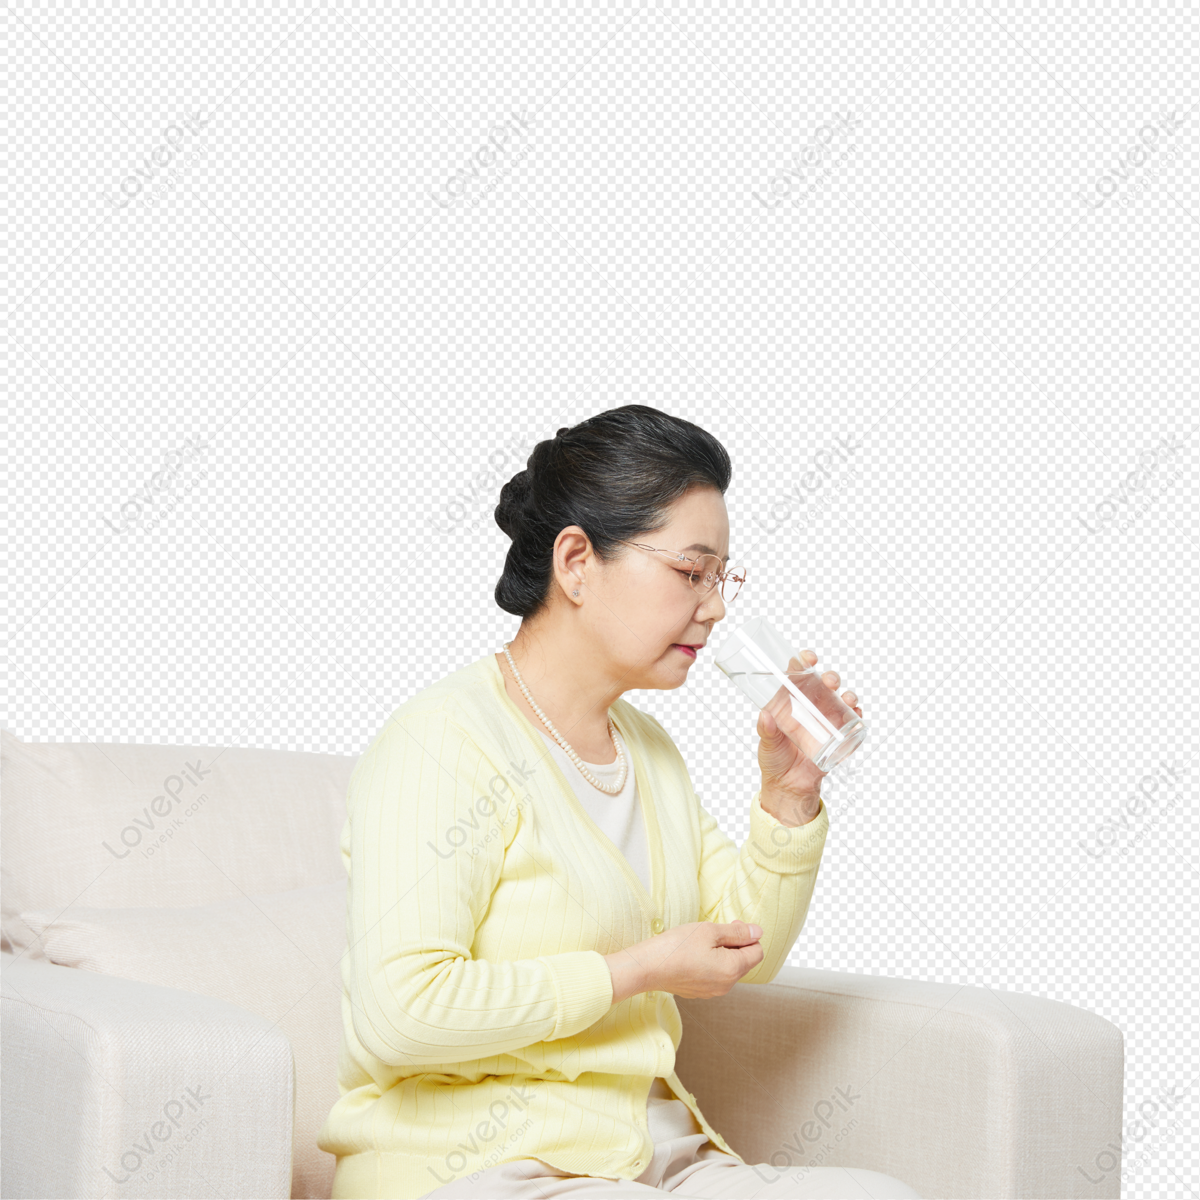 UPA 24 hours editorial stock photo. Image of medicine - 273052678